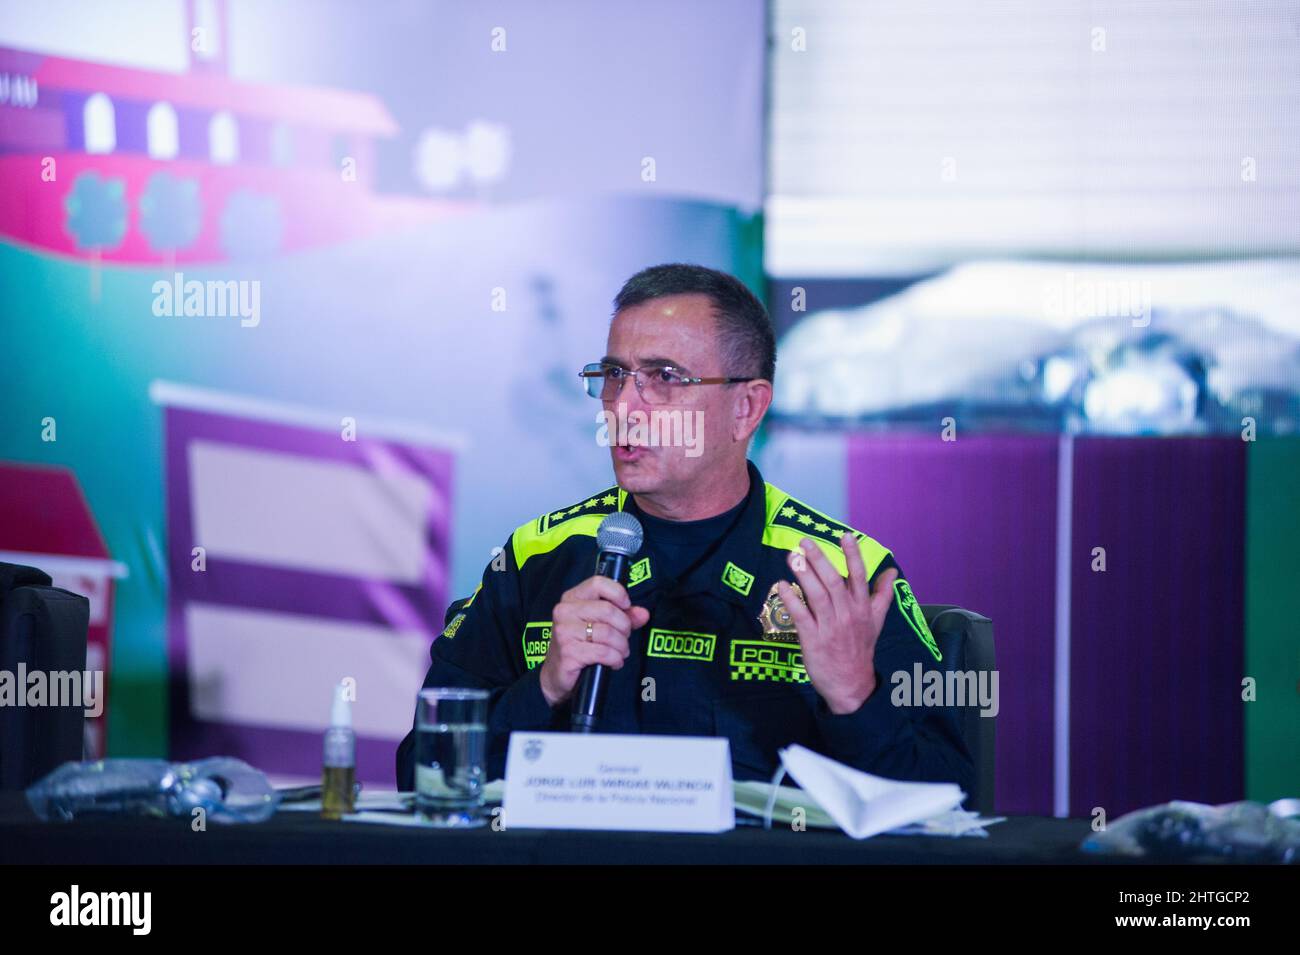 General of Colombia's police Jorge Luis Vargas participates during the inauguration ceremony of the Week of Citizen Security 'Semana de Seguridad Ciudadana' 2022, in Bogota, Colombia where 26 countries take part from February 28 to March 3. On February 28, 2022. Stock Photo